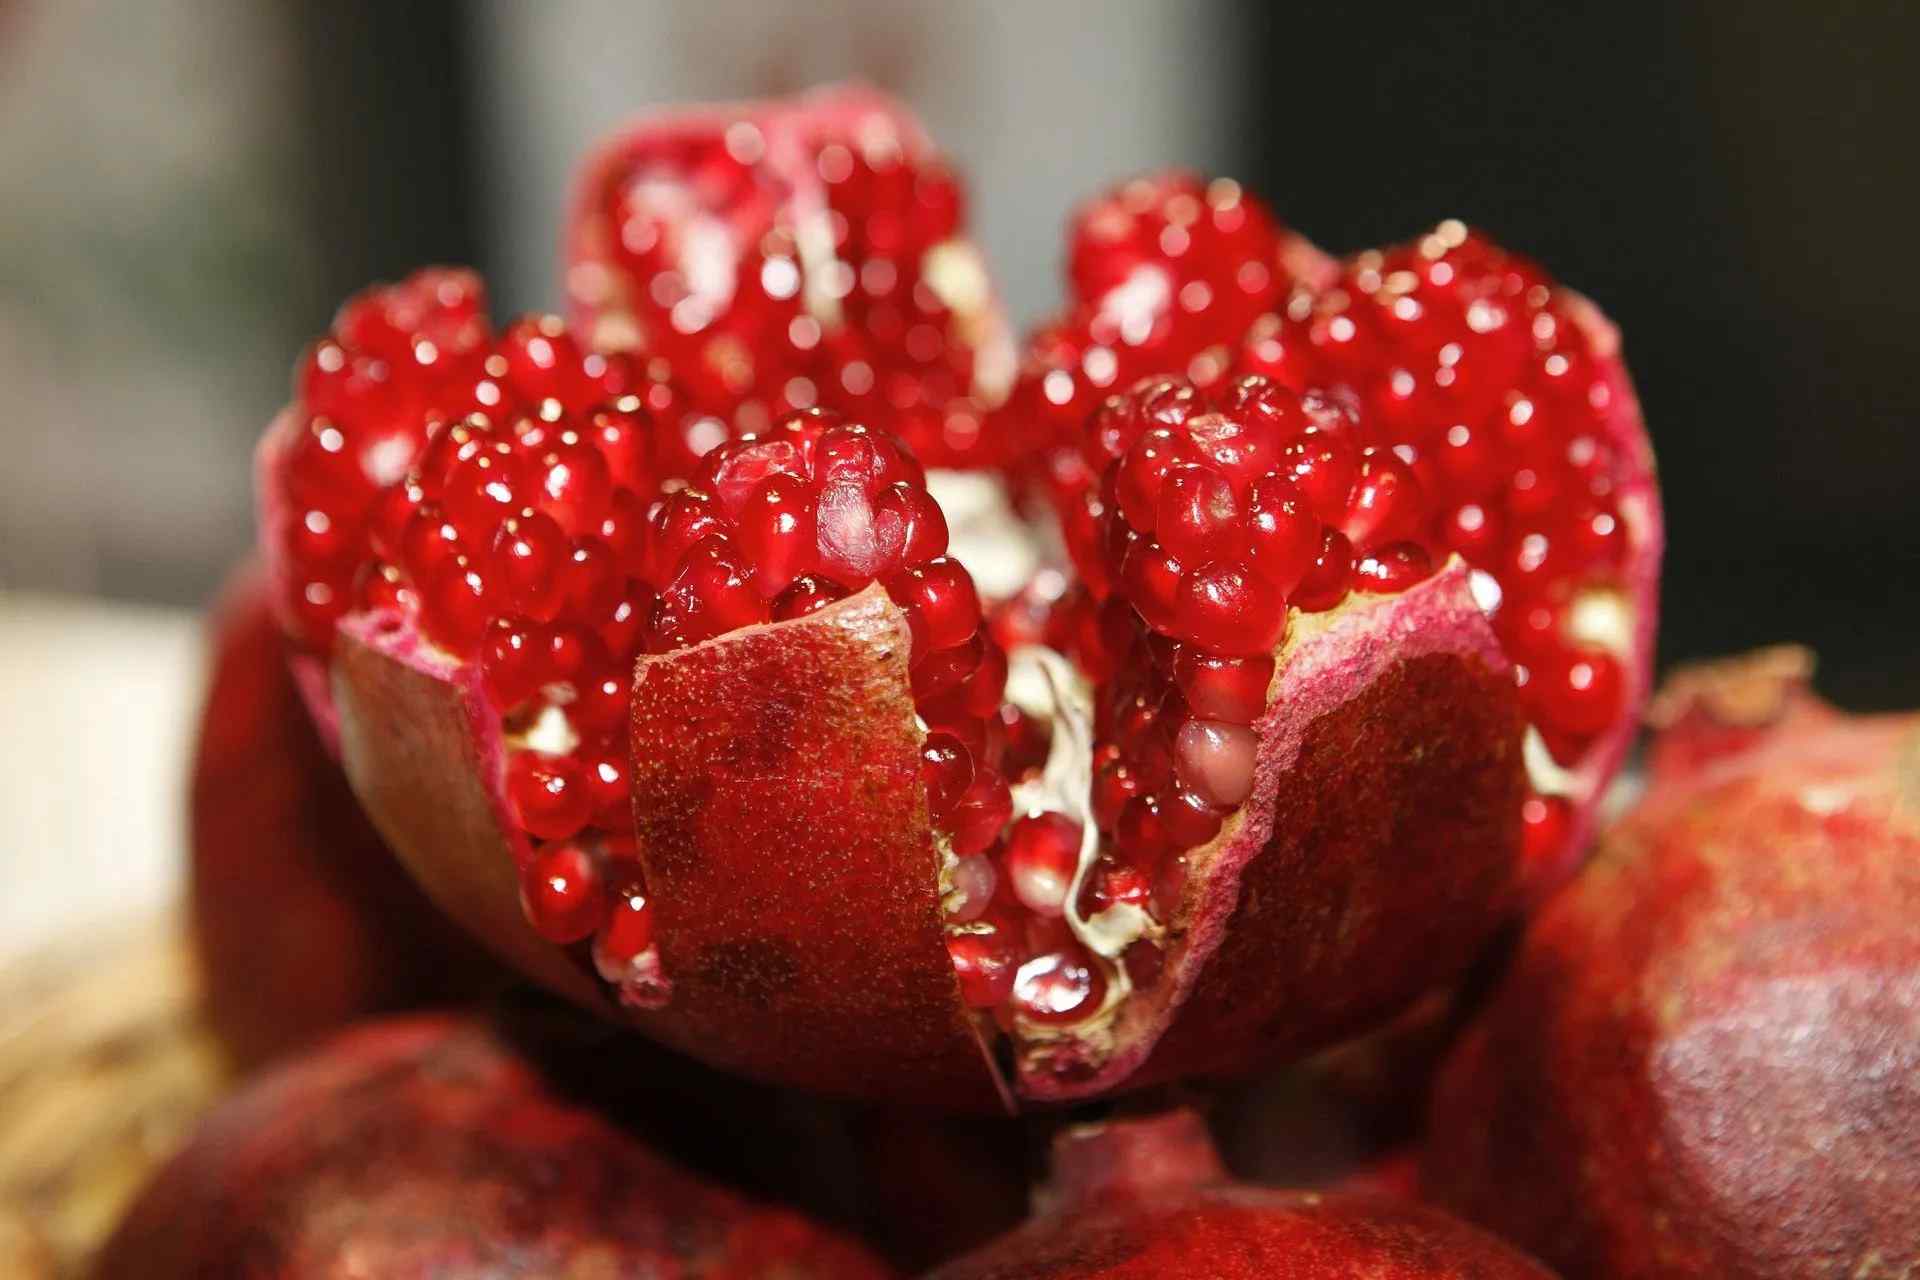 Pomegranates were crushed and used as a dye in ancient Rome.